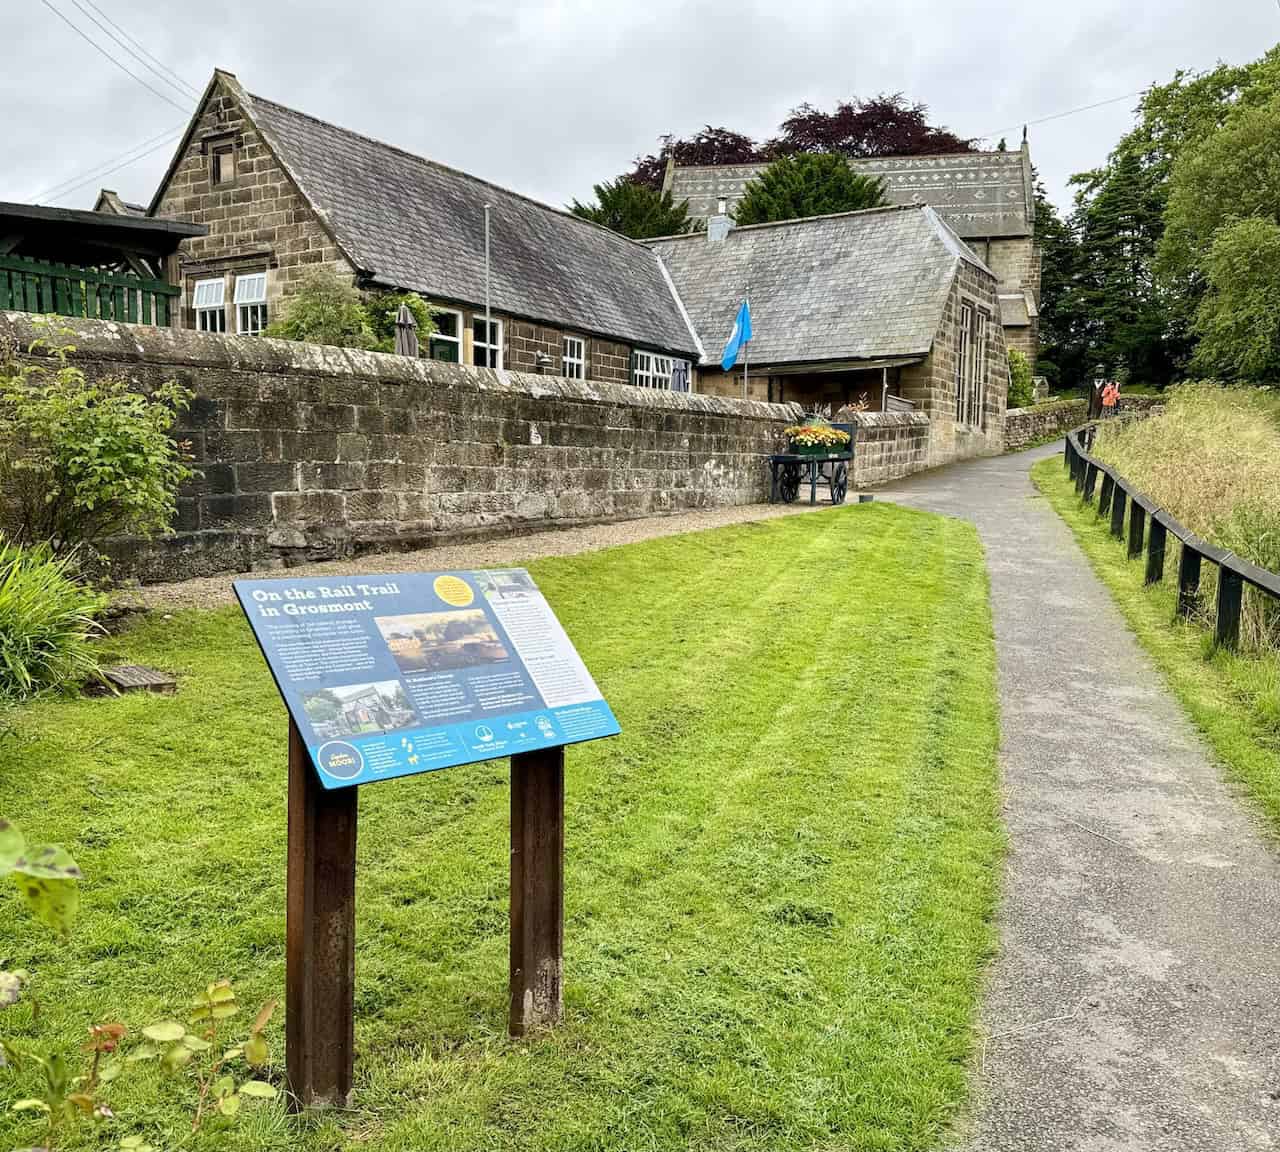 The path past the Old School Coffee Shop and St Matthew’s Church, following the well-signposted Rail Trail on the Grosmont to Goathland walk.